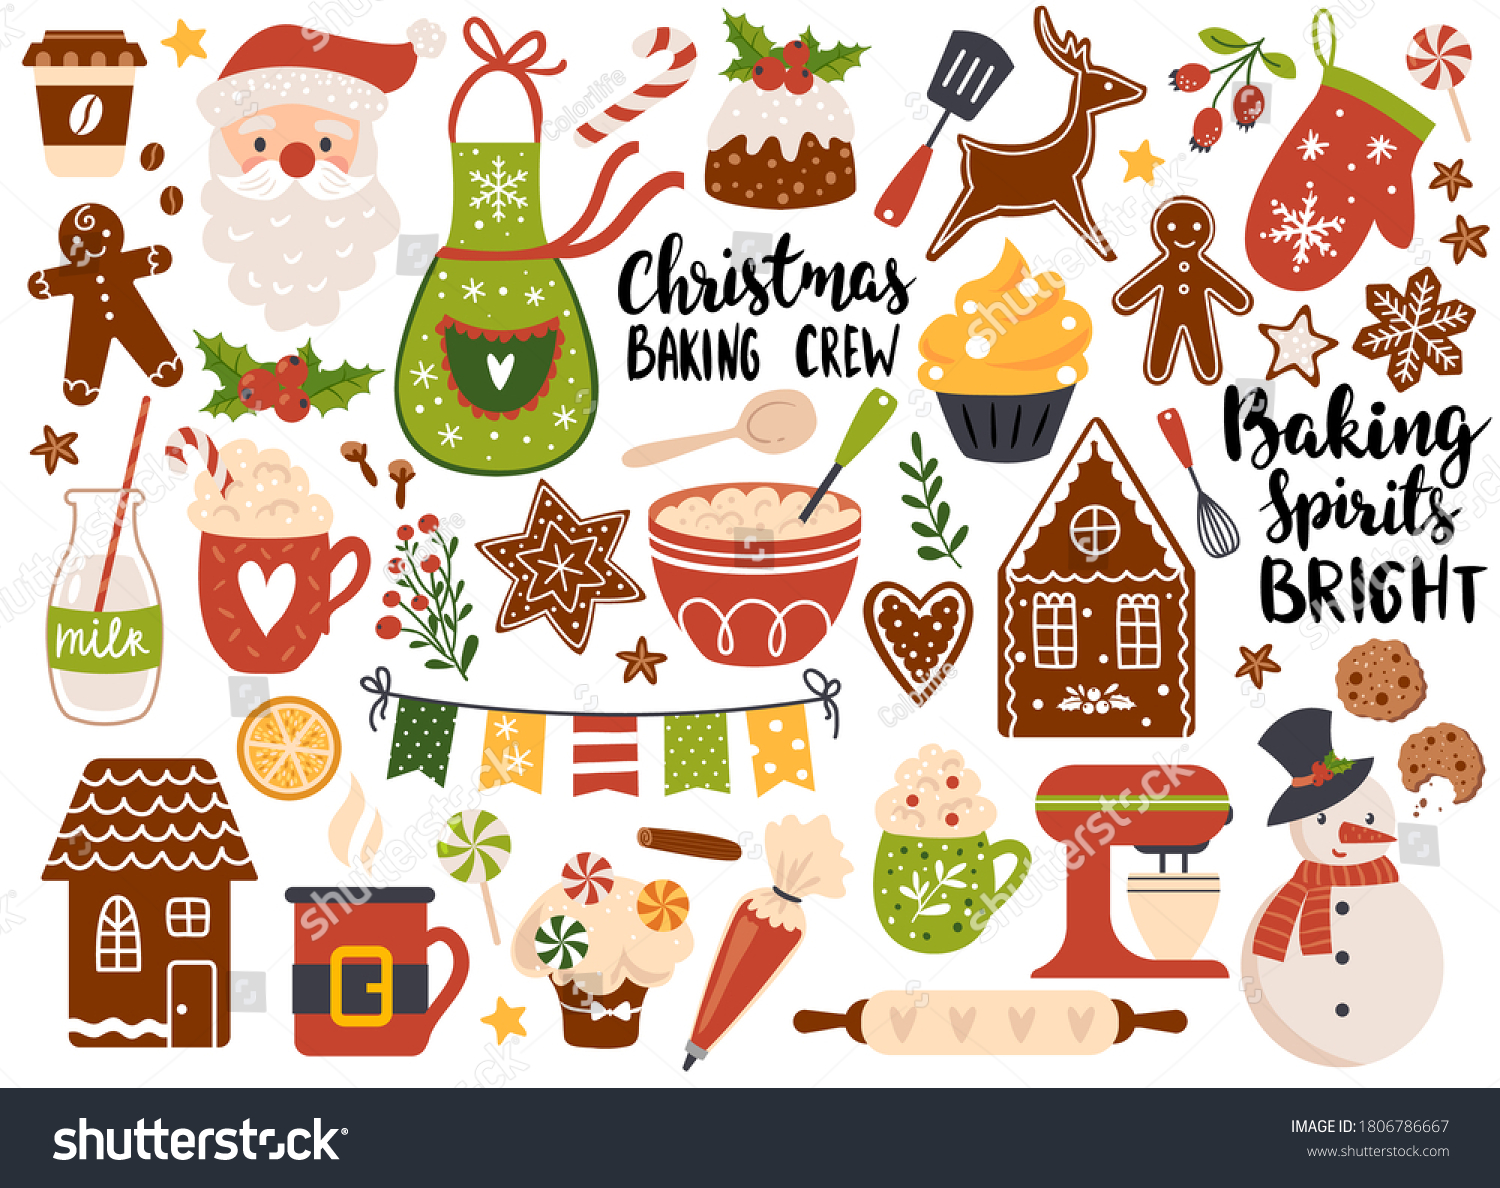 Christmas baking, Set of festive gingerbread cookies and holiday drinks. Vector illustration. Perfect for sticker kit, scrapbooking, greeting card, party invitation, poster, tags #1806786667